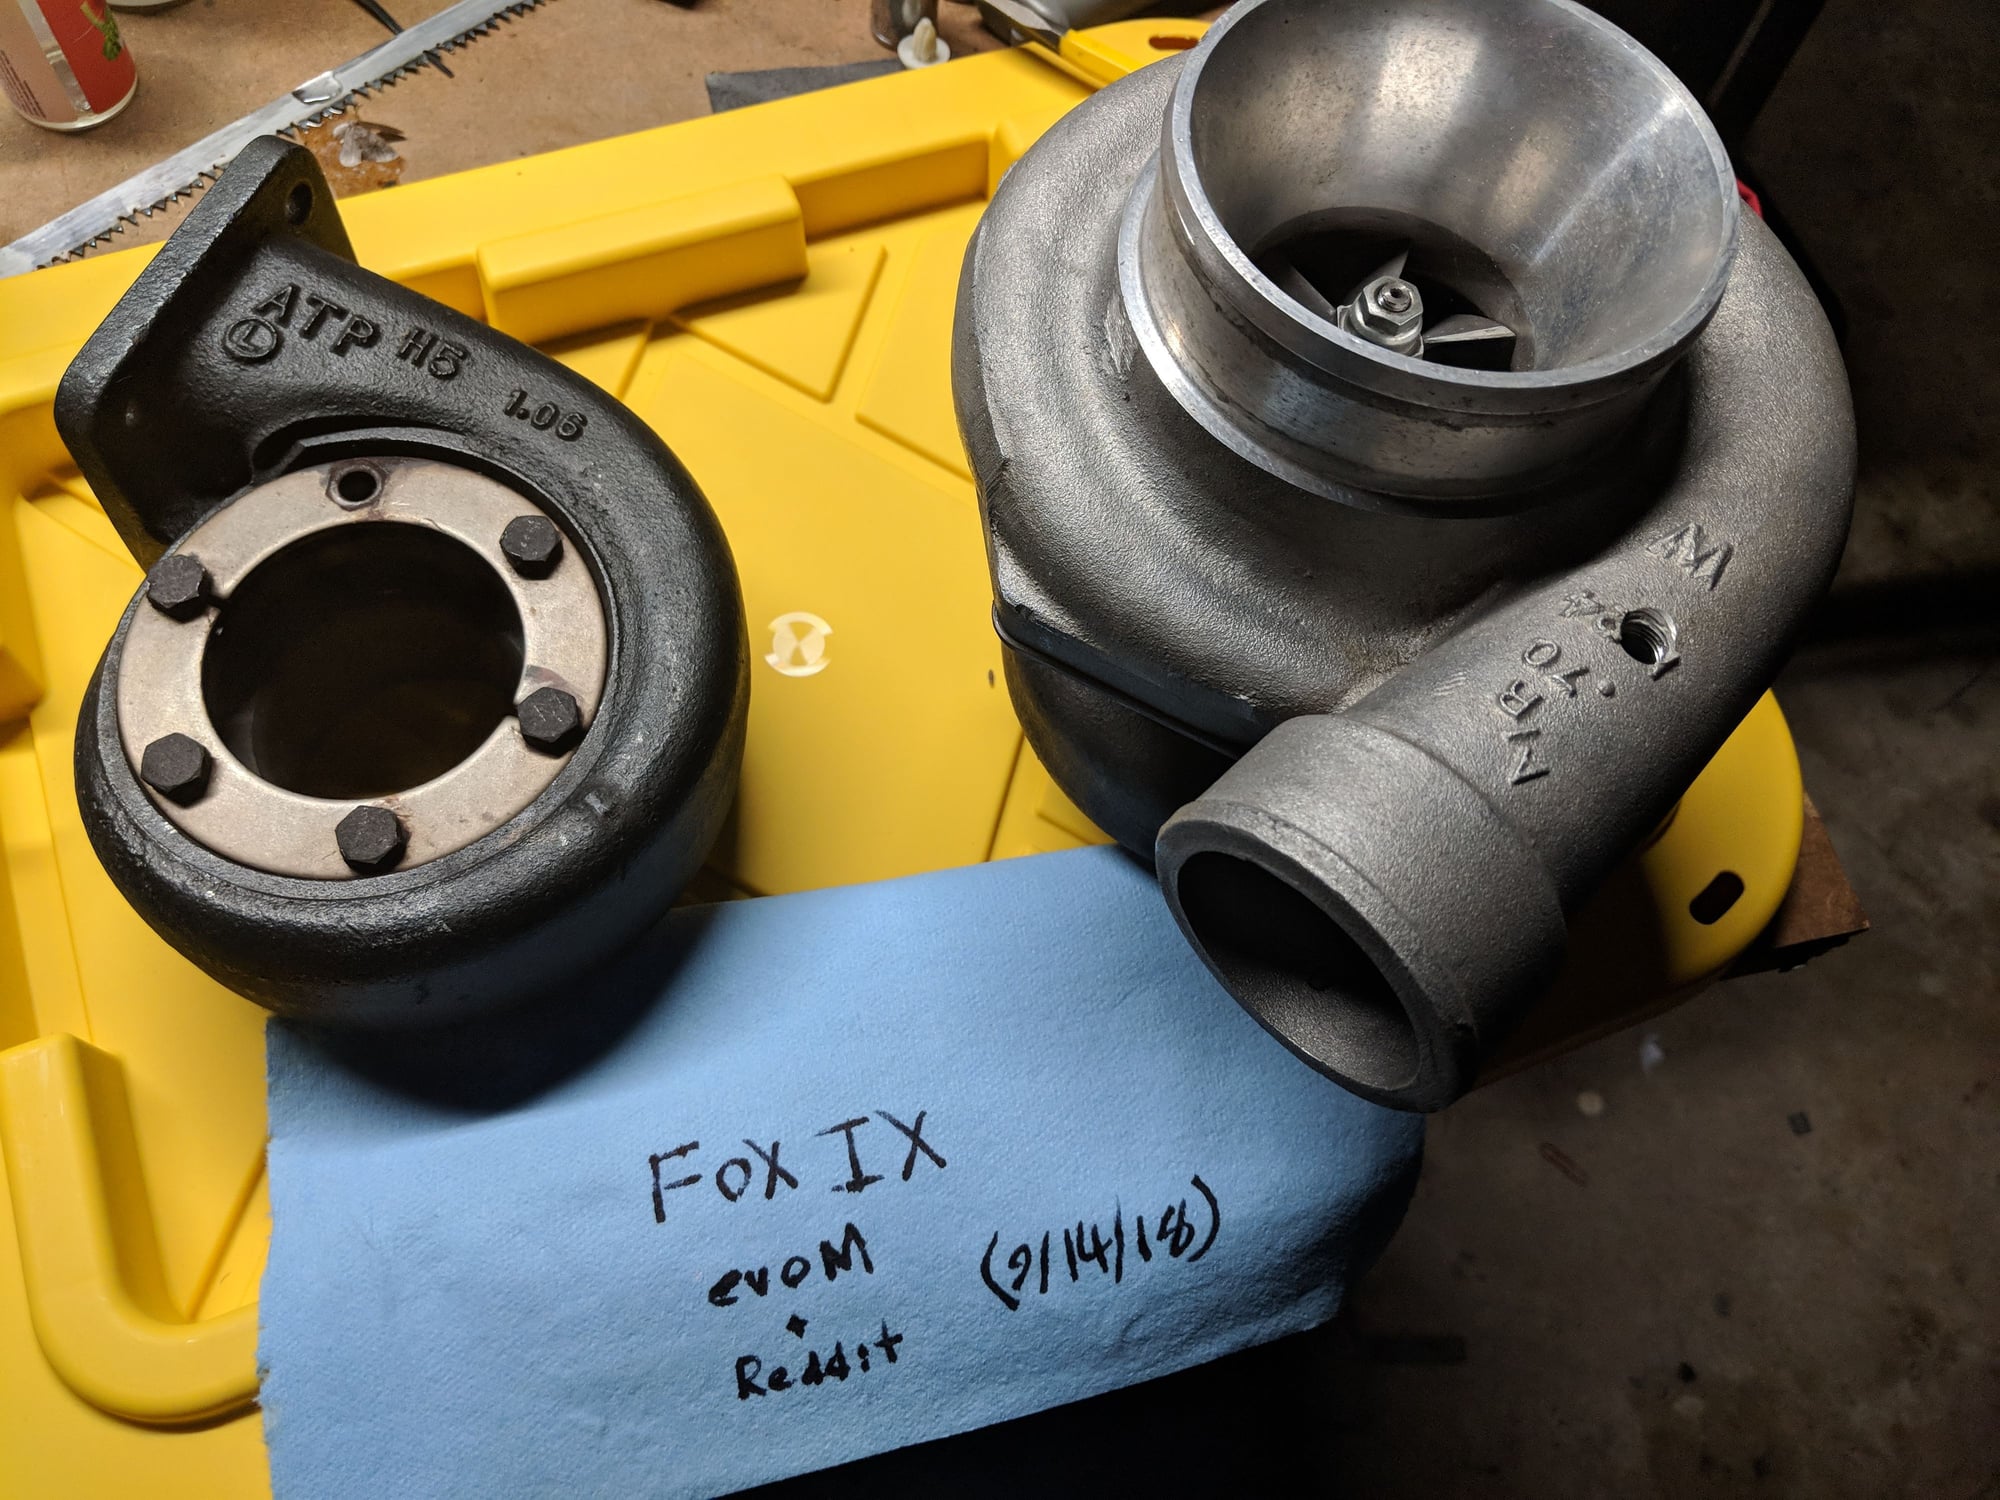 Engine - Power Adders - Good Condition Garret GT3582R with T3 Undivided Vband and T4 Divided Vband Housings - Used - Ben Lomond, CA 95005, United States